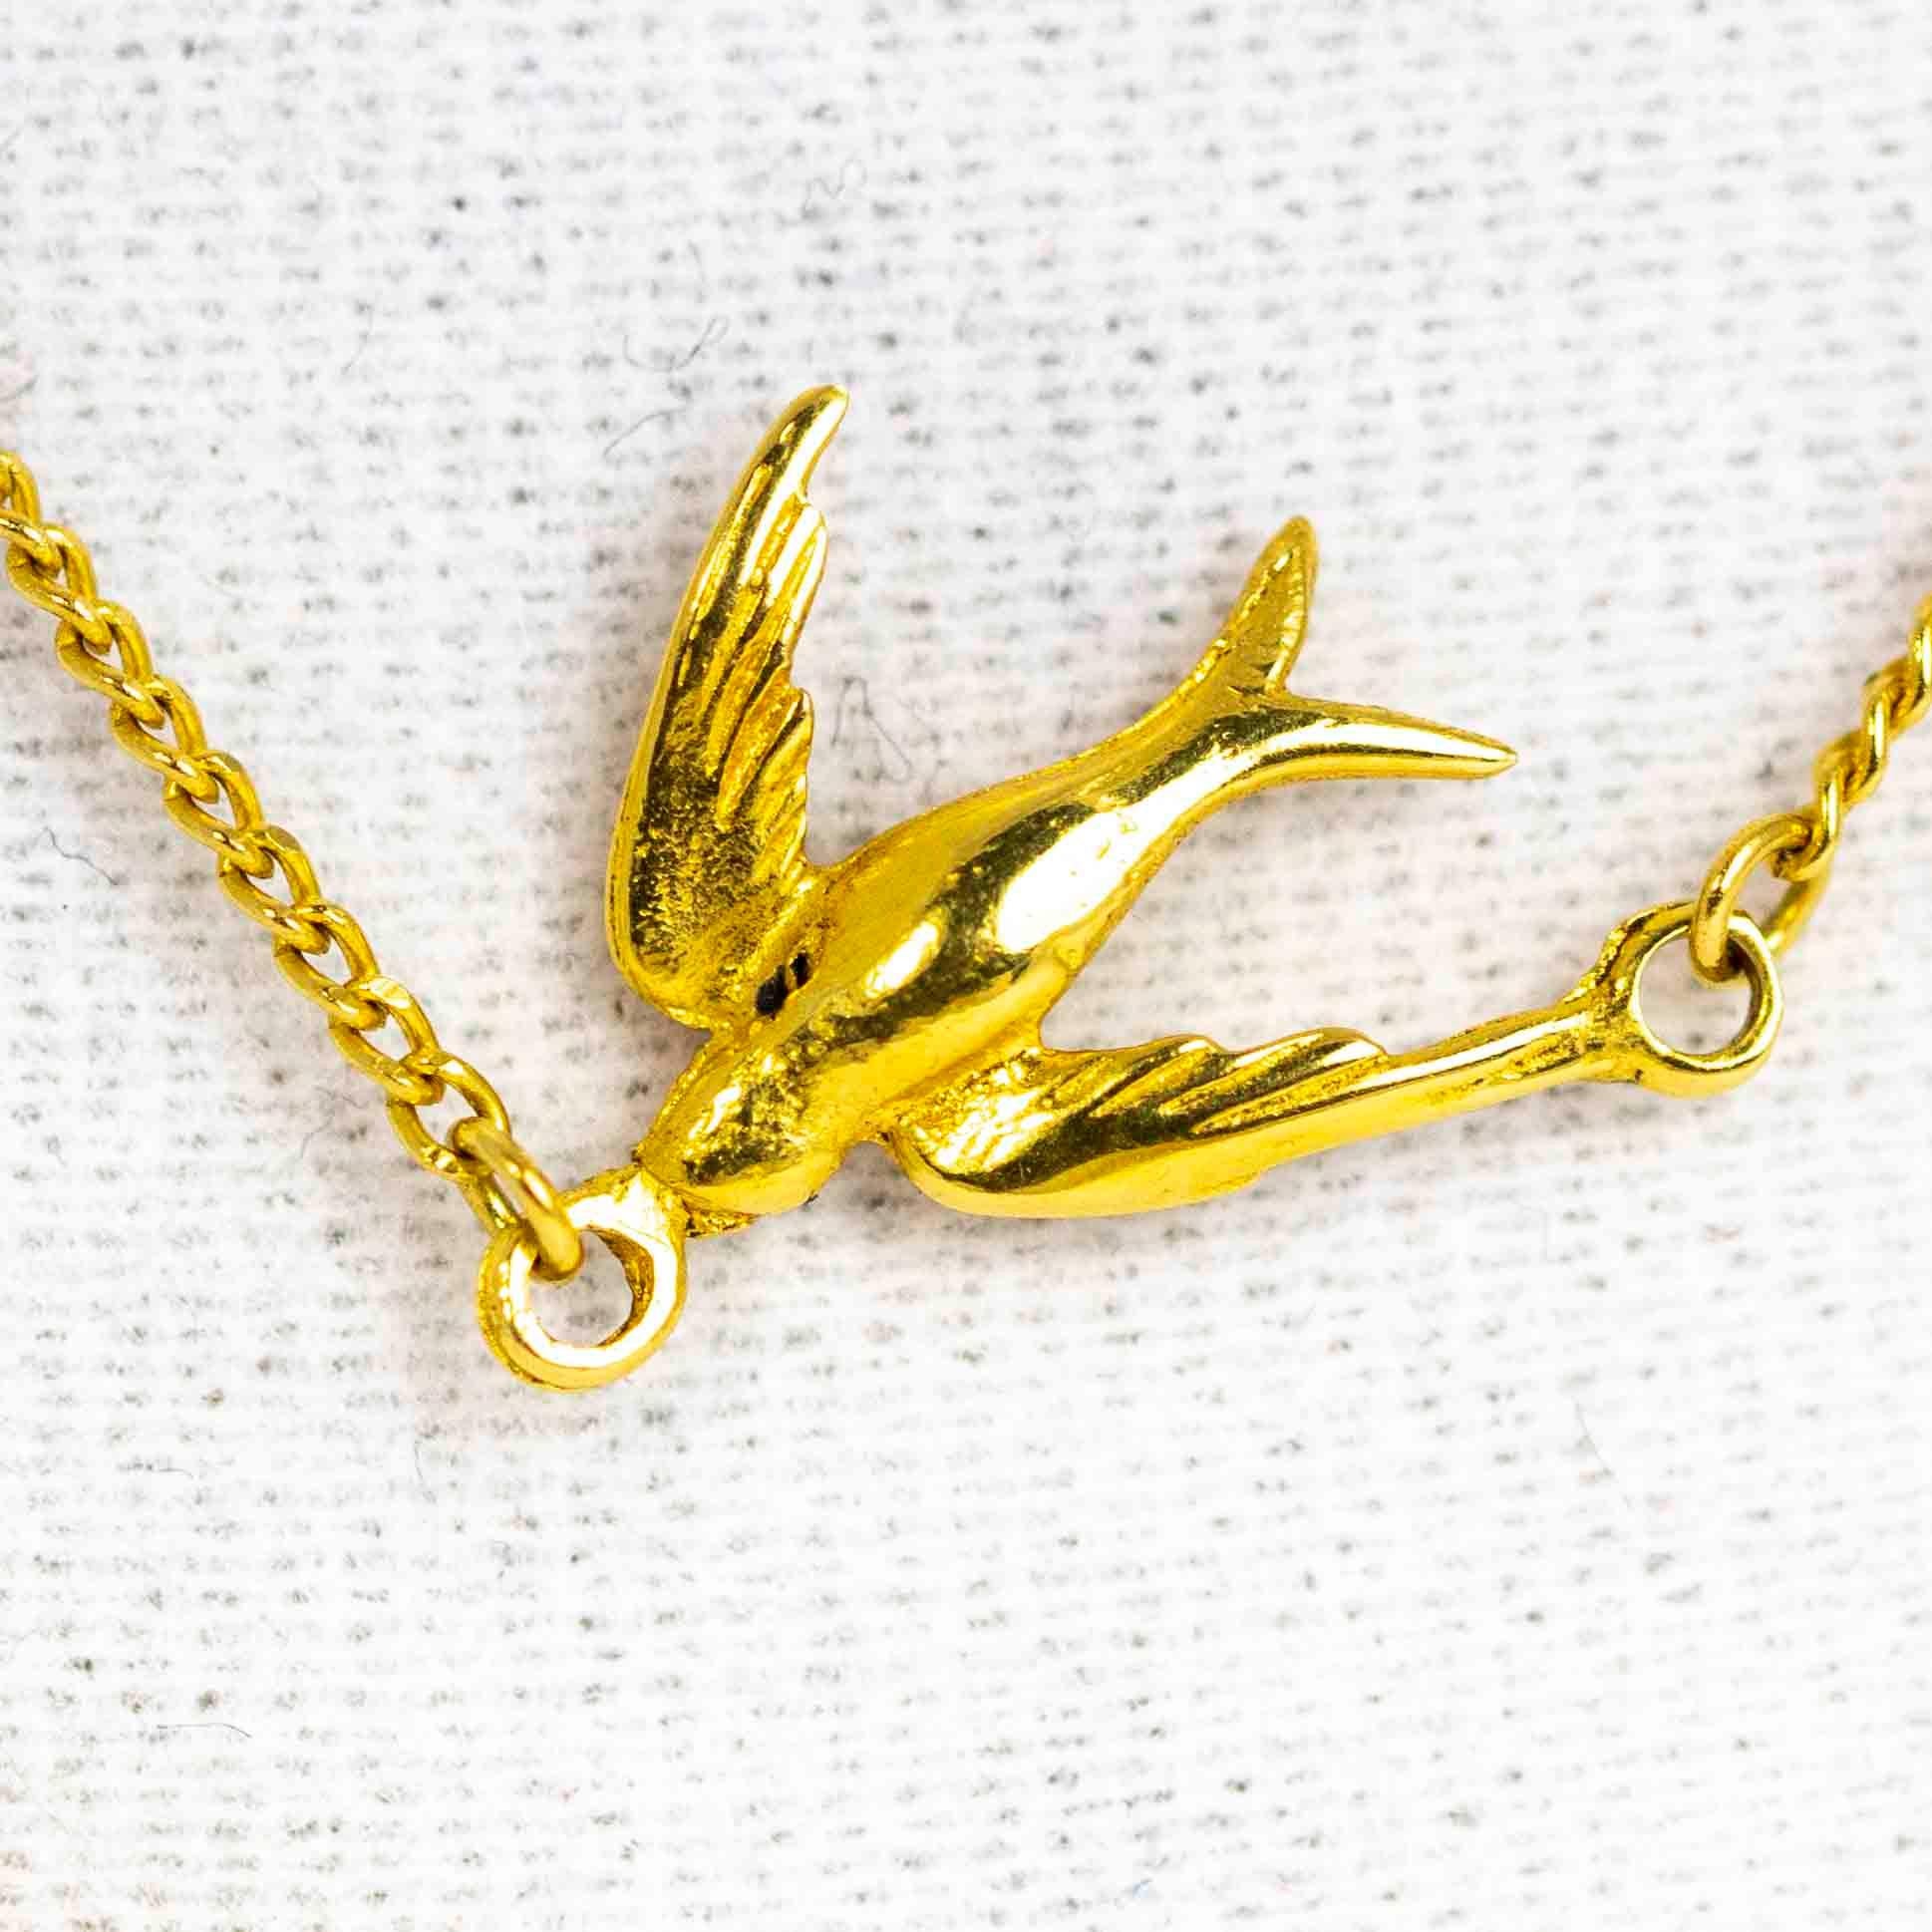 A wonderful vintage chain necklace set with three exquisite swallows in flight. Modelled in 18 carat yellow gold.

Length: 36.6 cm